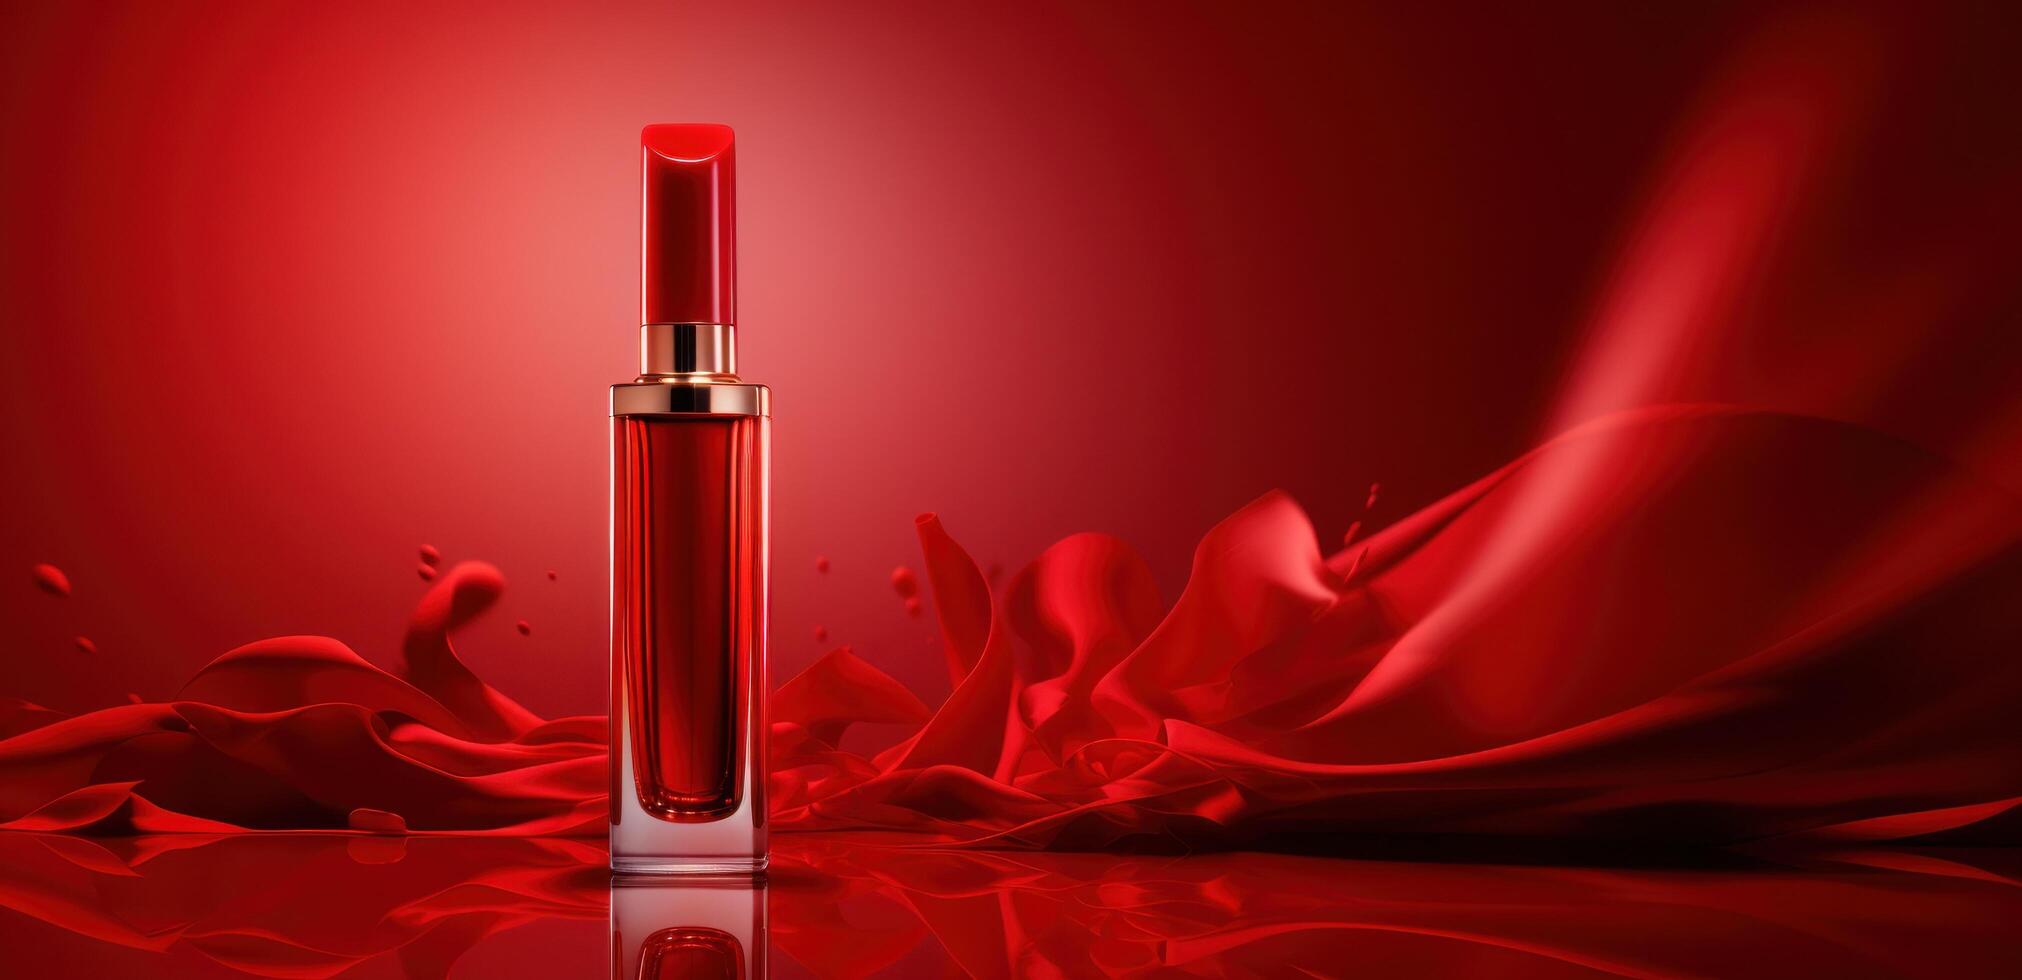 AI generated a lipstick shaped bottle of perfume on a red background photo